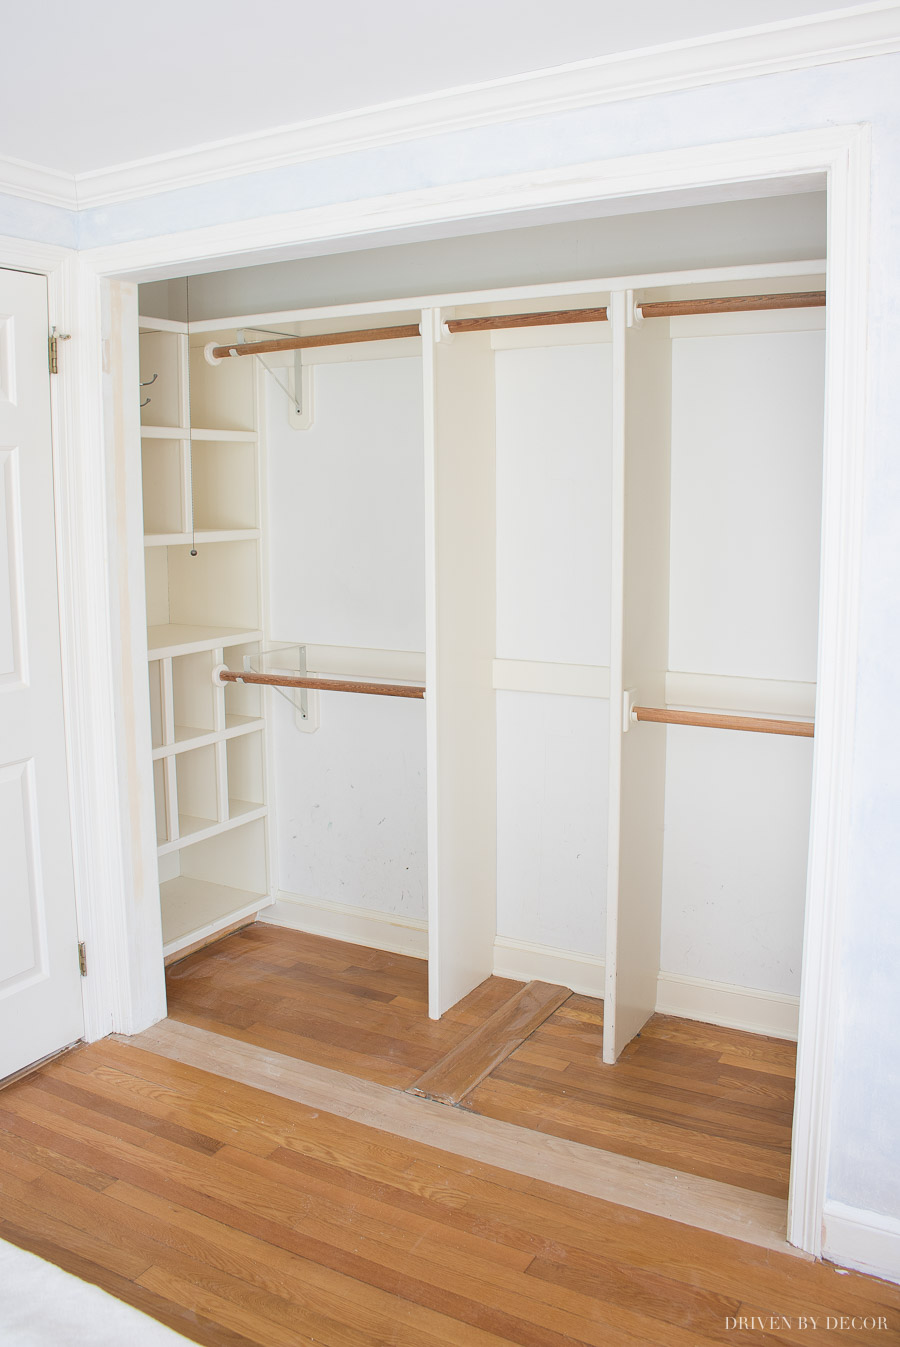 Love seeing the transformation of this closet! So many closet door ideas to steal in this post!